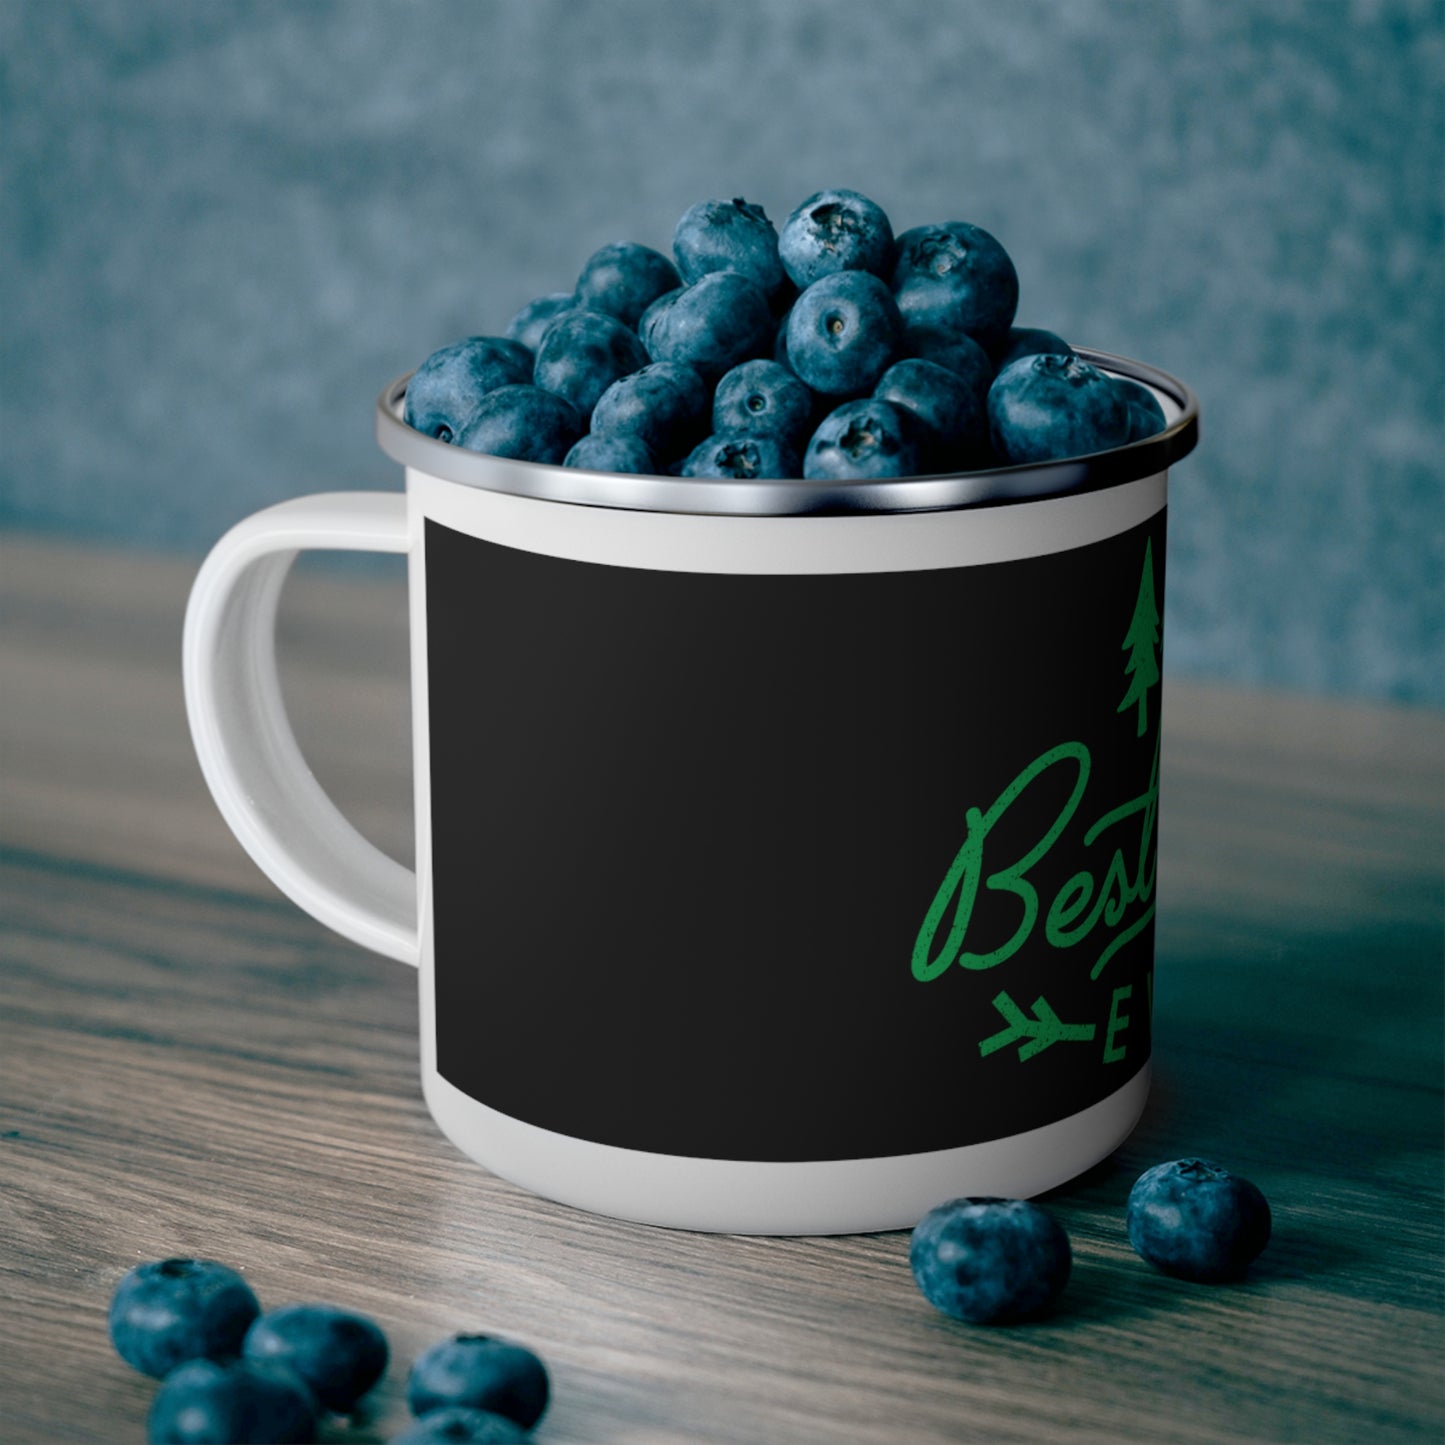 Camping mug filled with berries